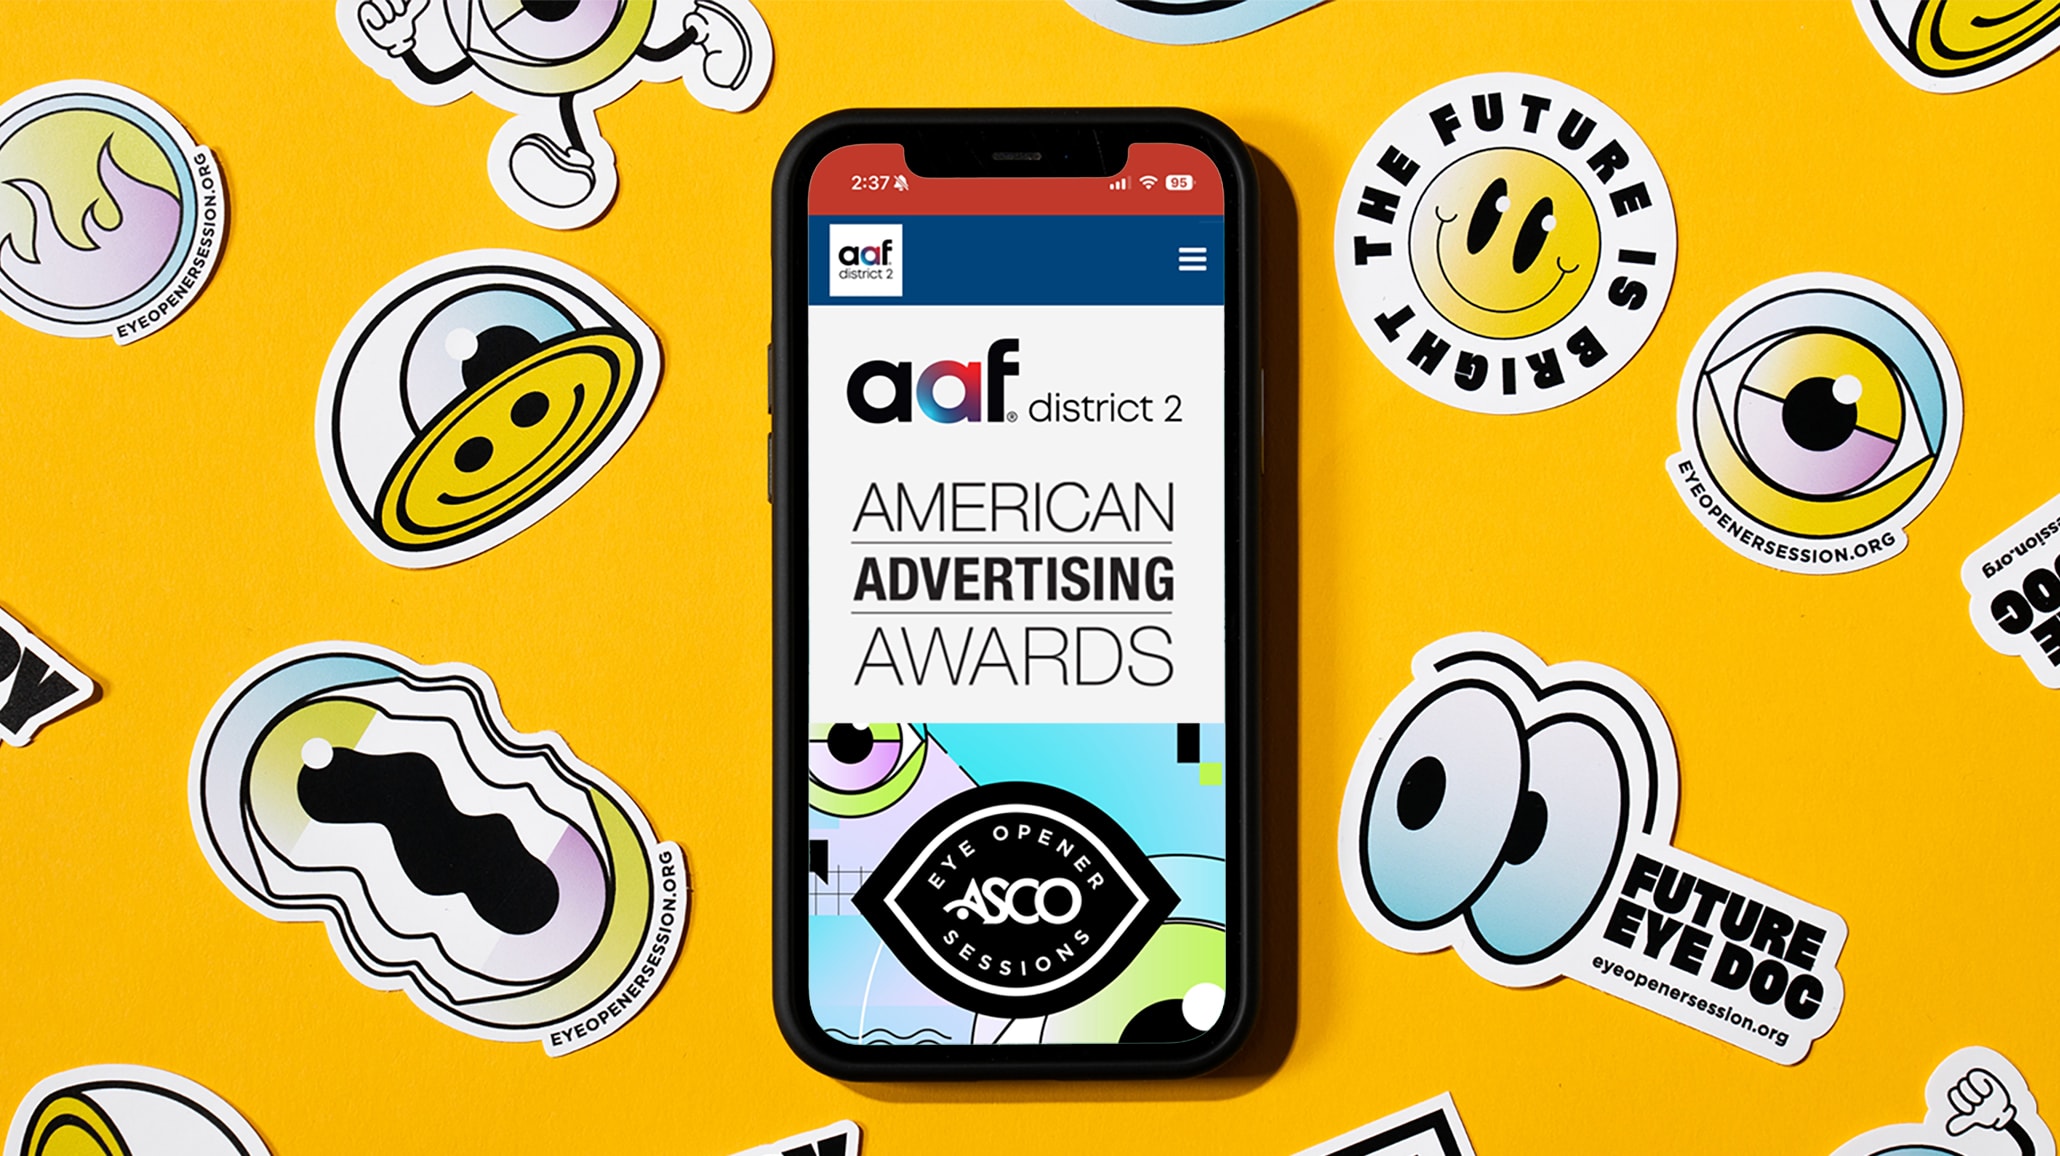 Smartphone displaying the American Advertising Awards webpage featuring ASCO.